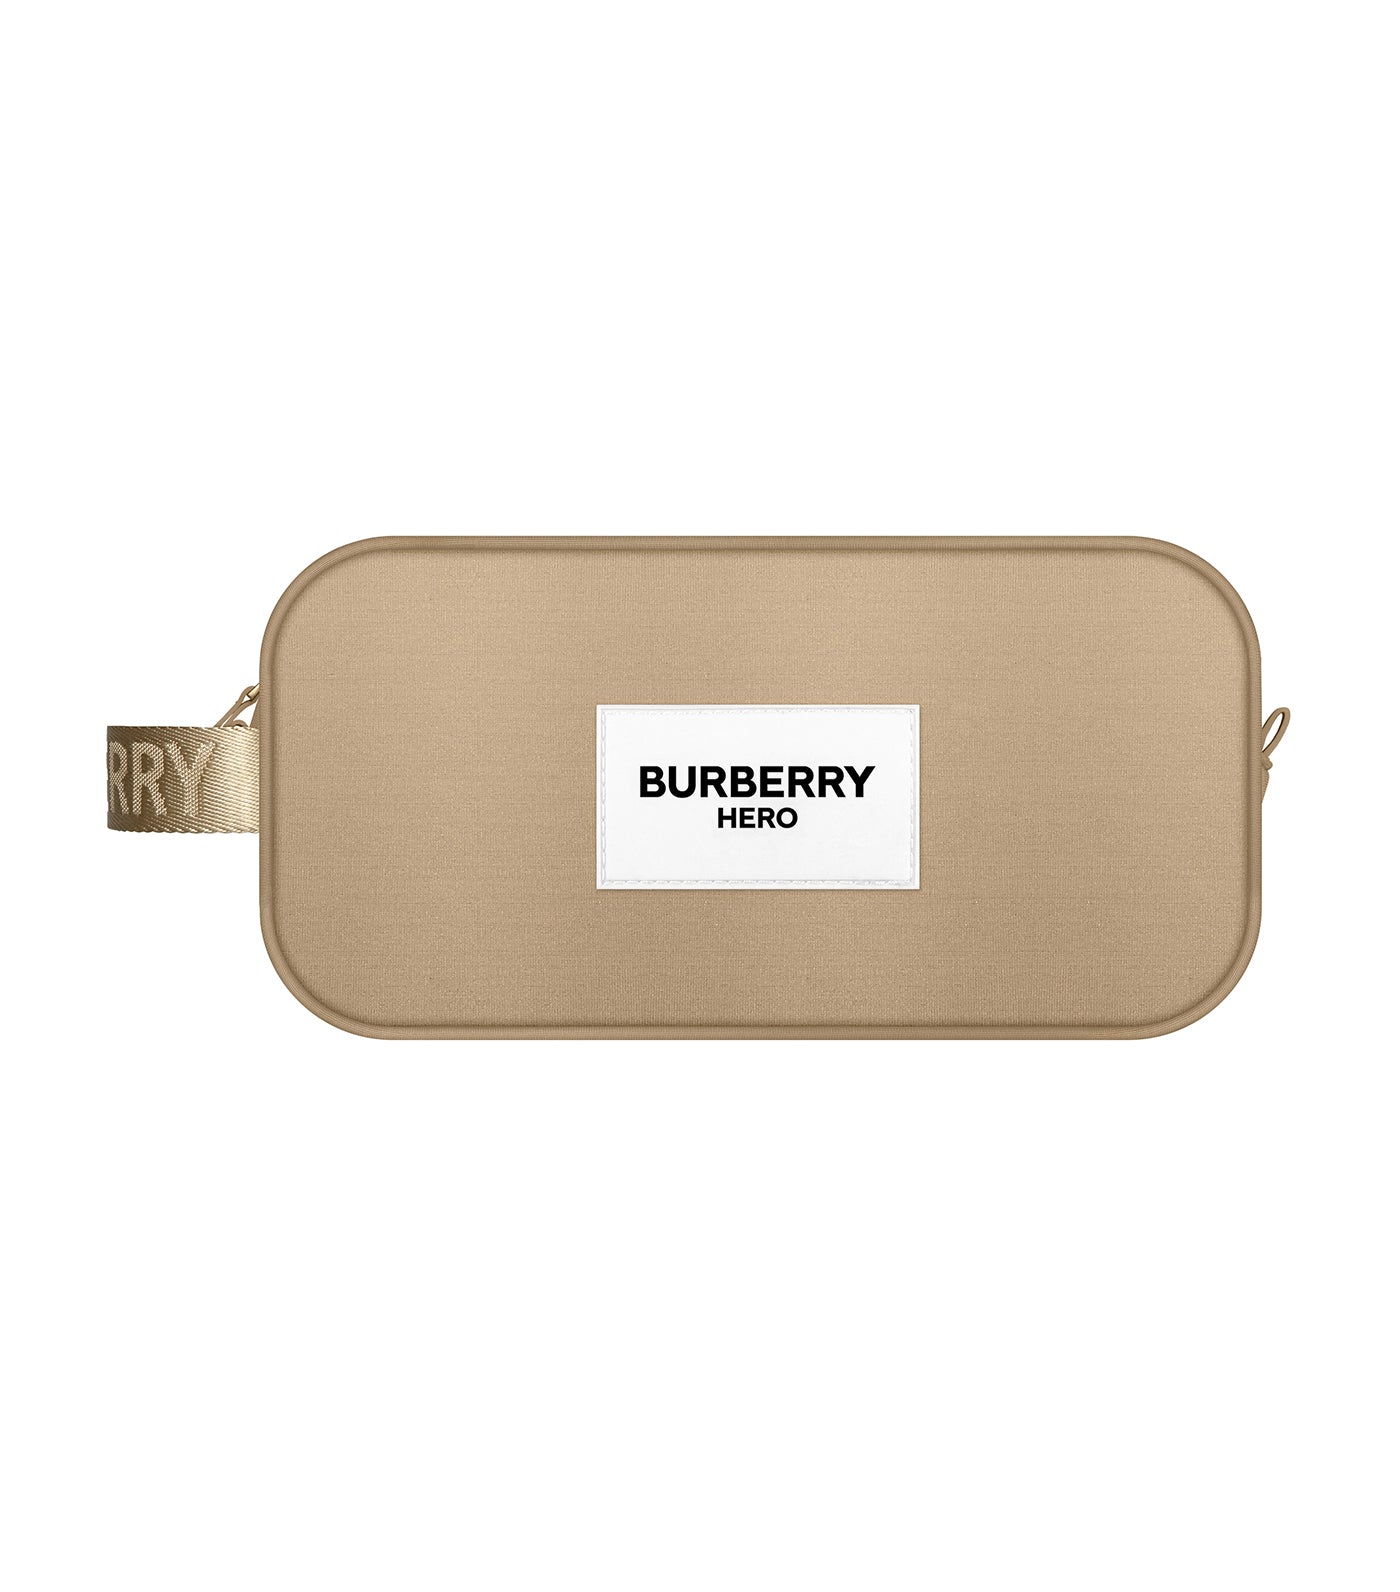 Burberry Free Hero for Men Travel Pouch